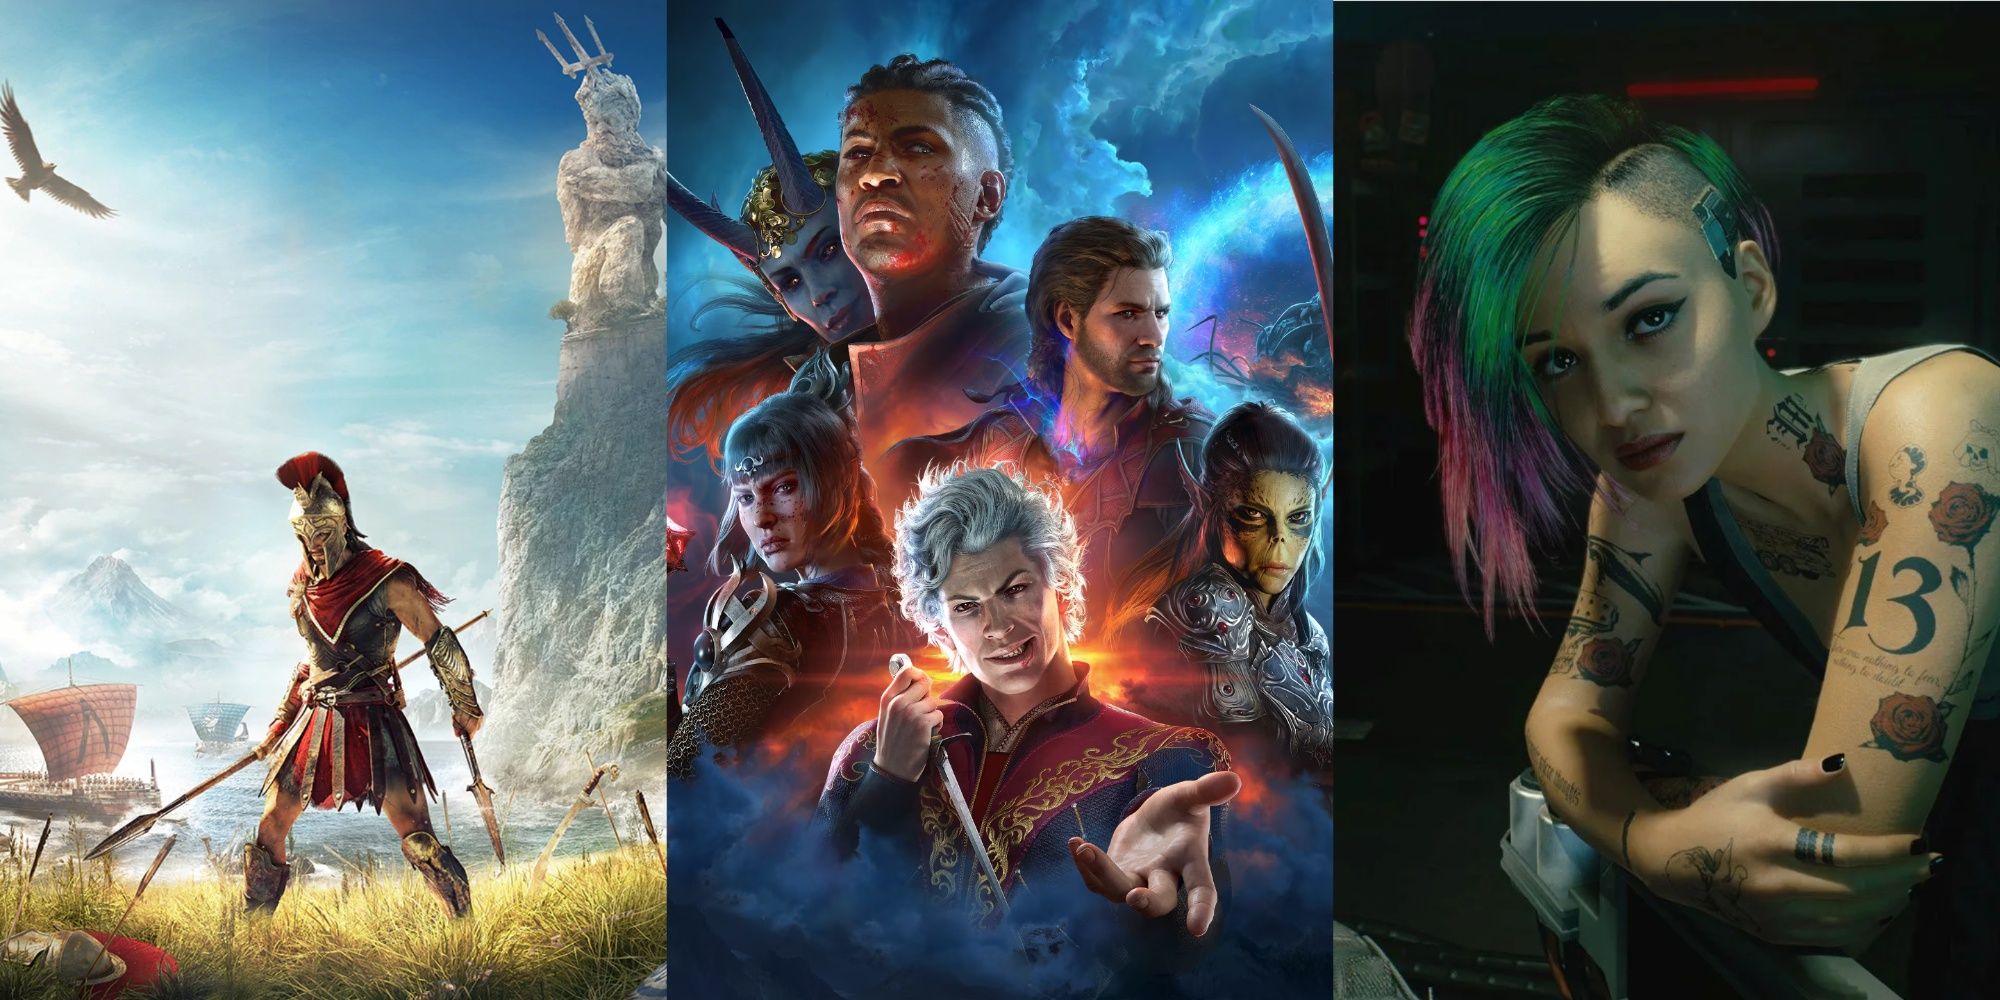 RPG's With Great Character Diversity: Assassin's Creed Odyssey, Baldur's Gate 3, and Judy frrom Cyberpunk 2077